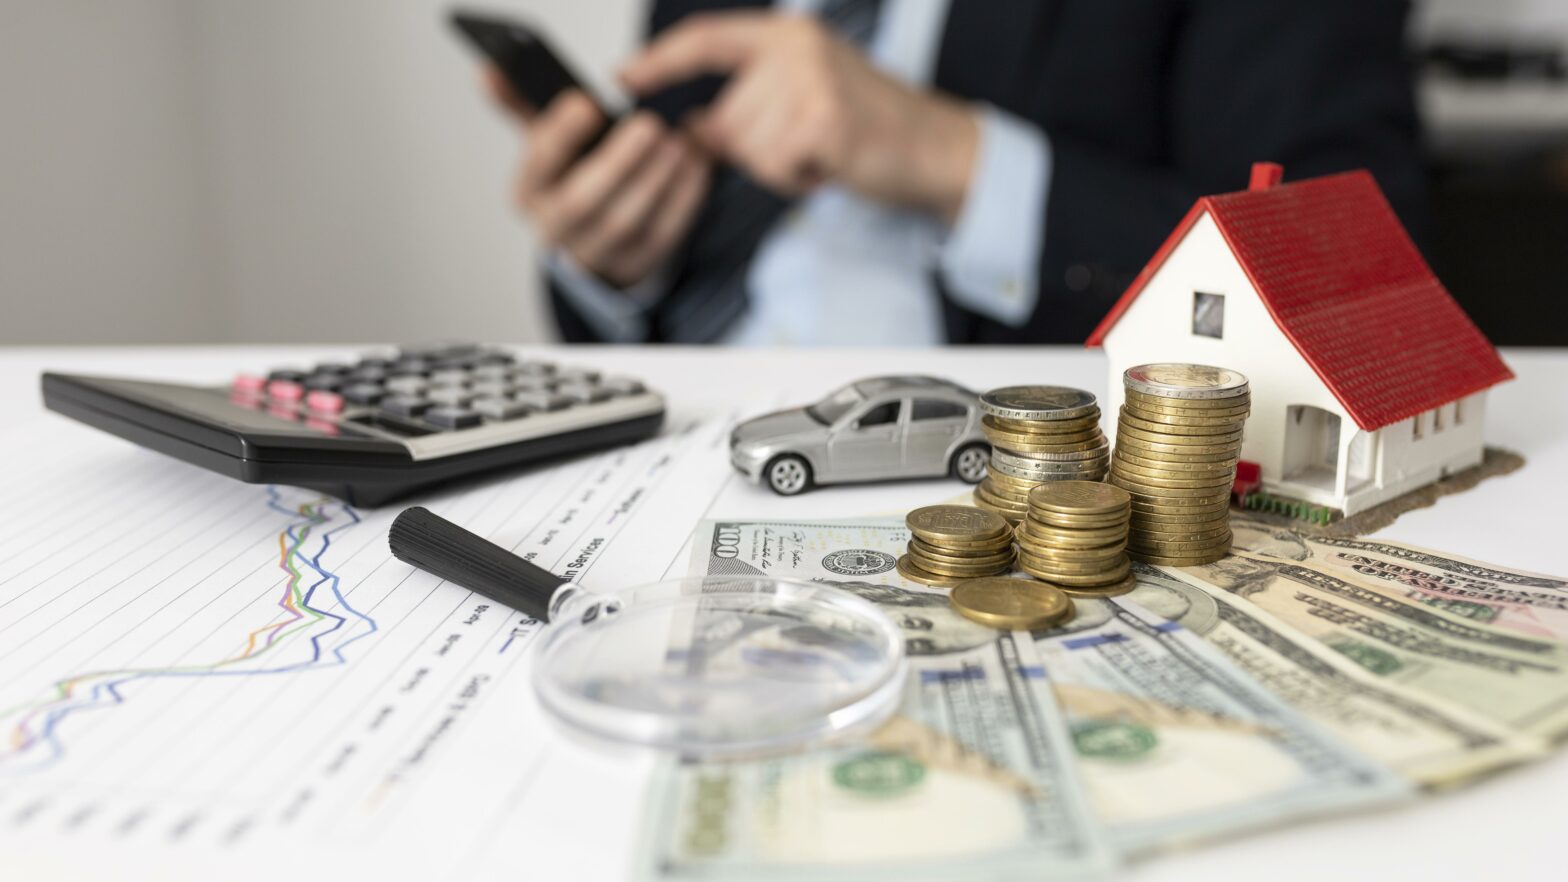 A man making notes at a table with money and a calculator on it alongside a model car and house.